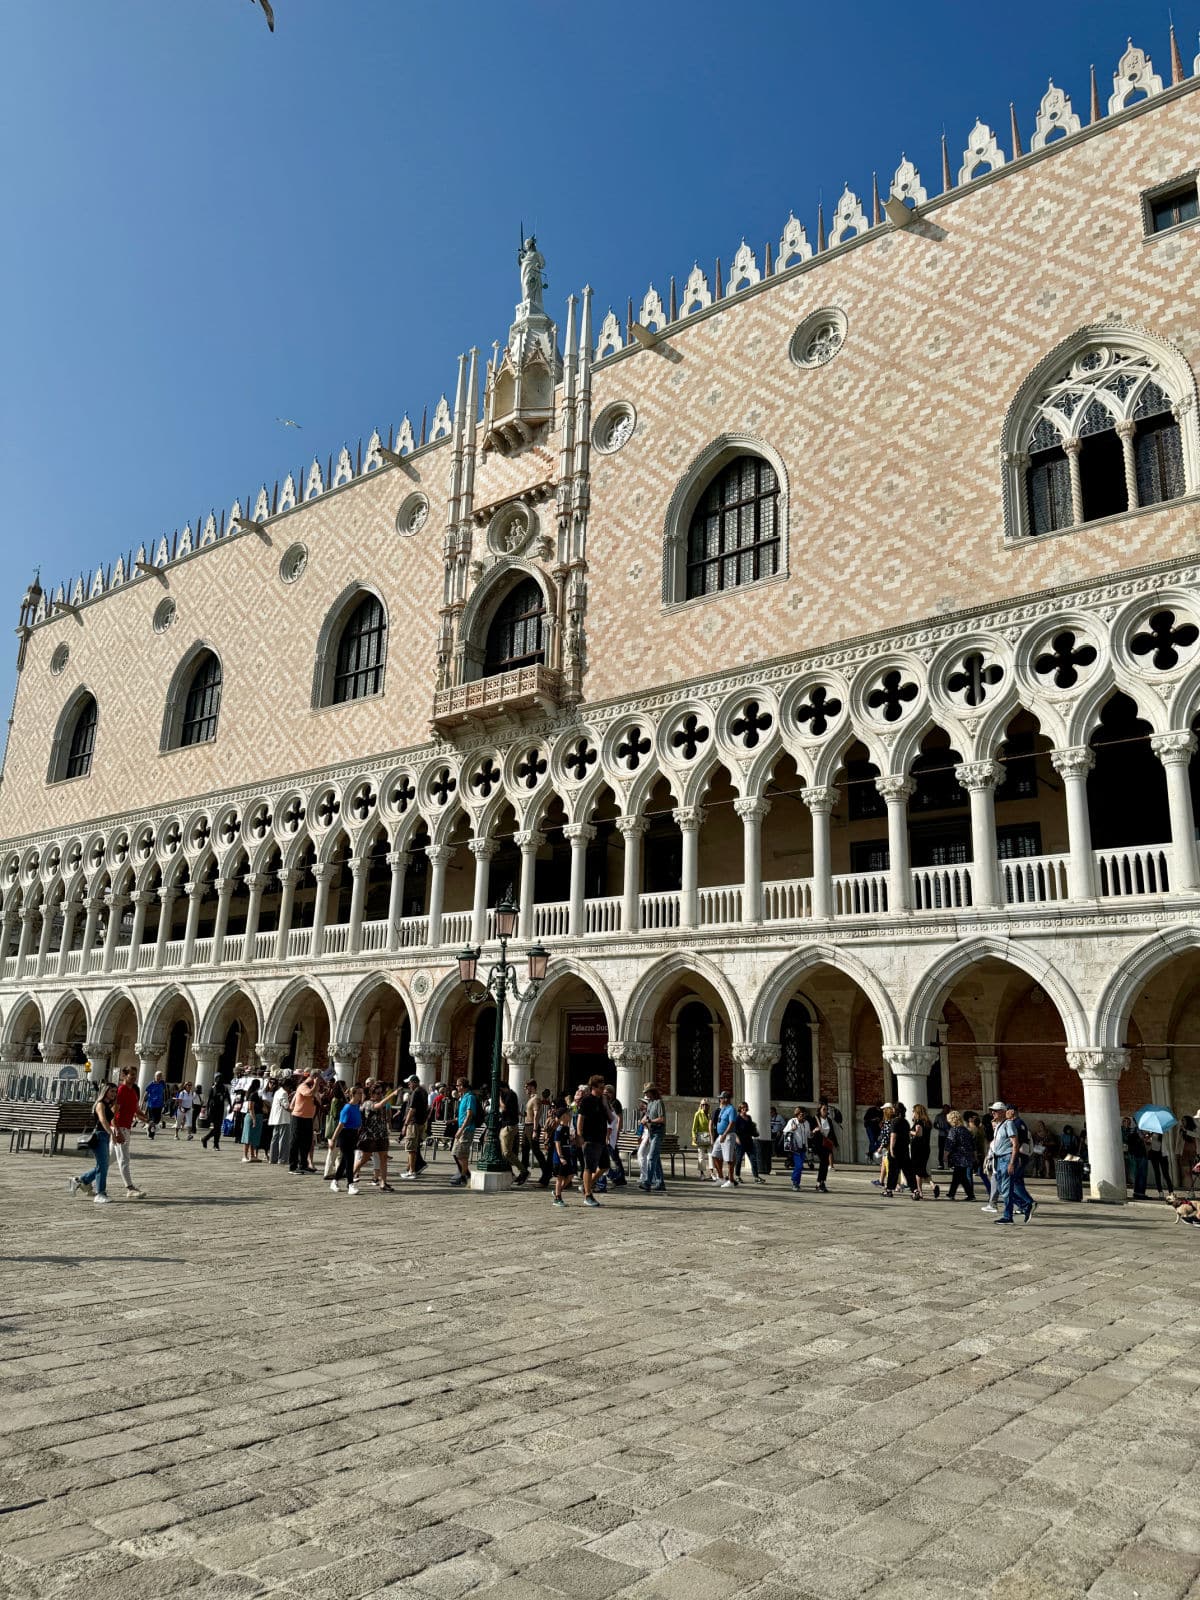 Doge's Palace in Venice Italy.